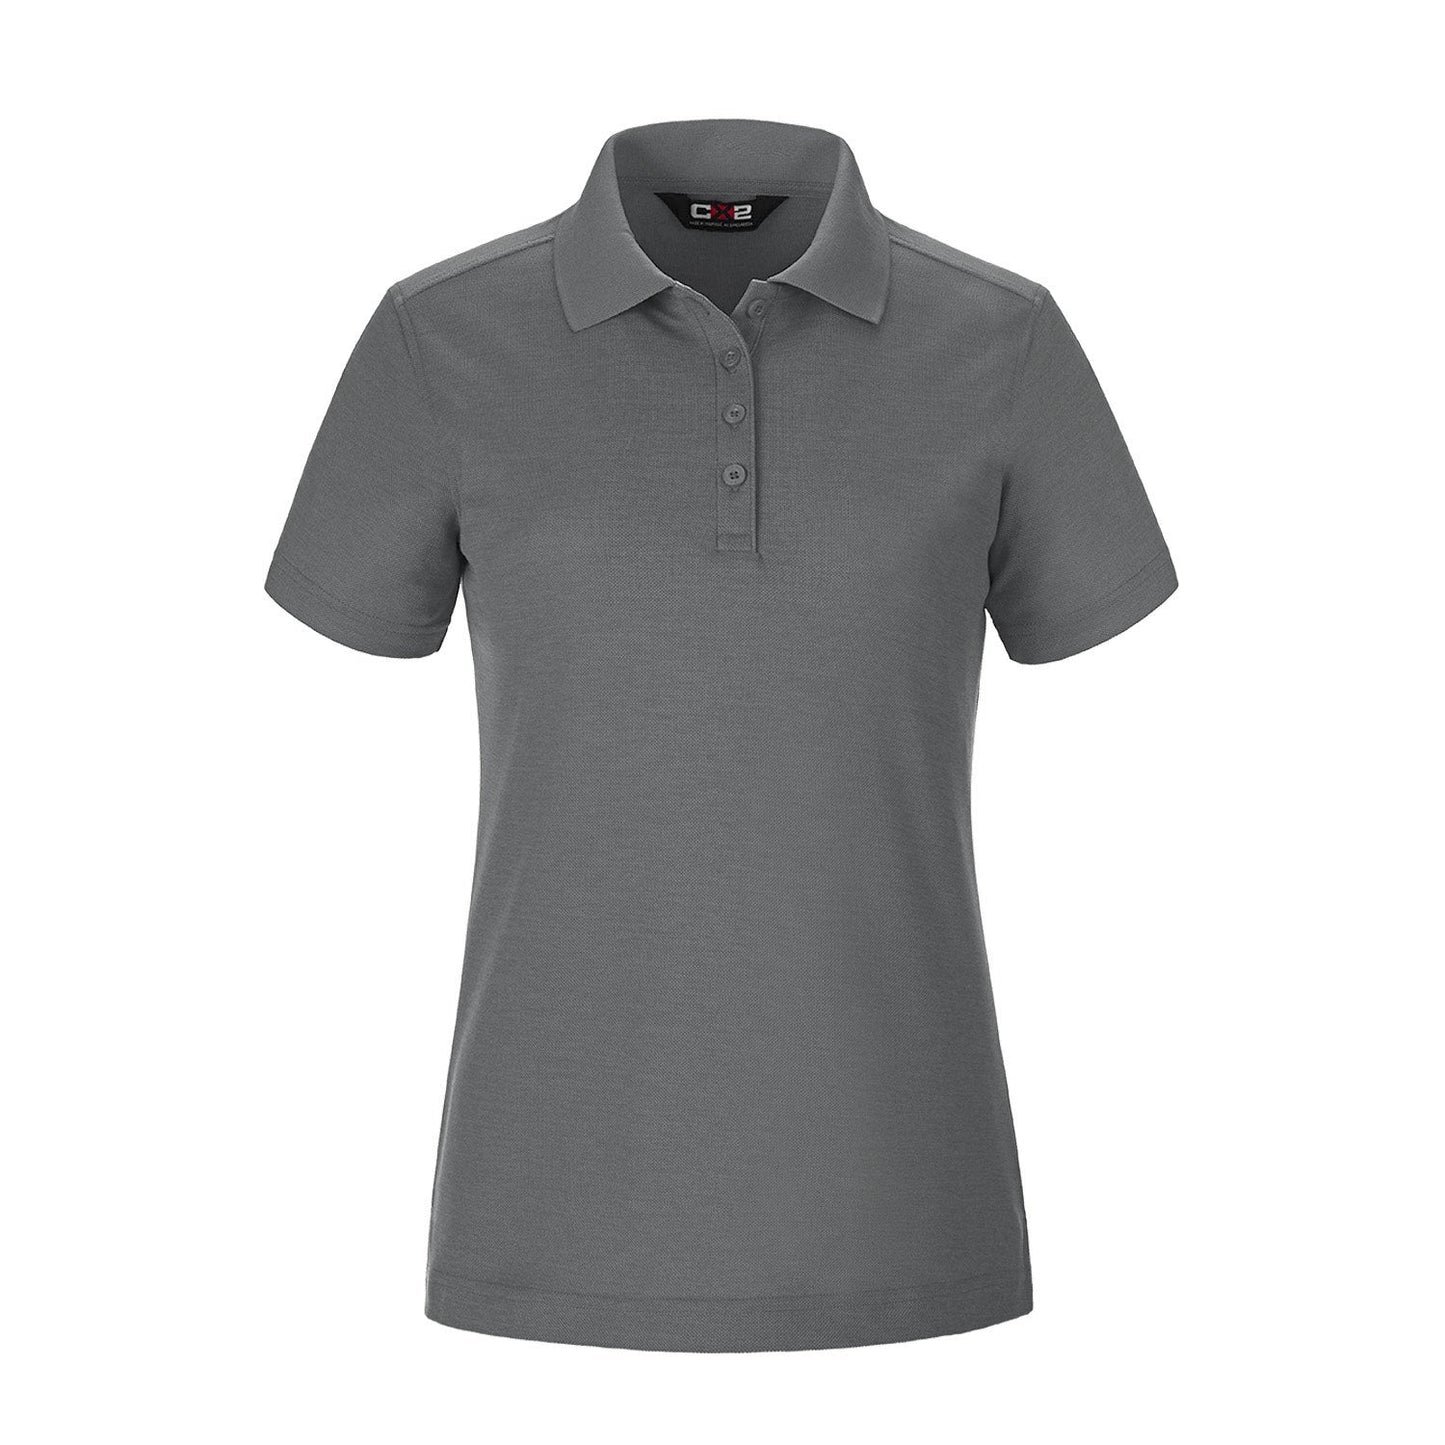 S05736 - Ace Ladies Pique Mesh Polo Steel Grey / XS Polos